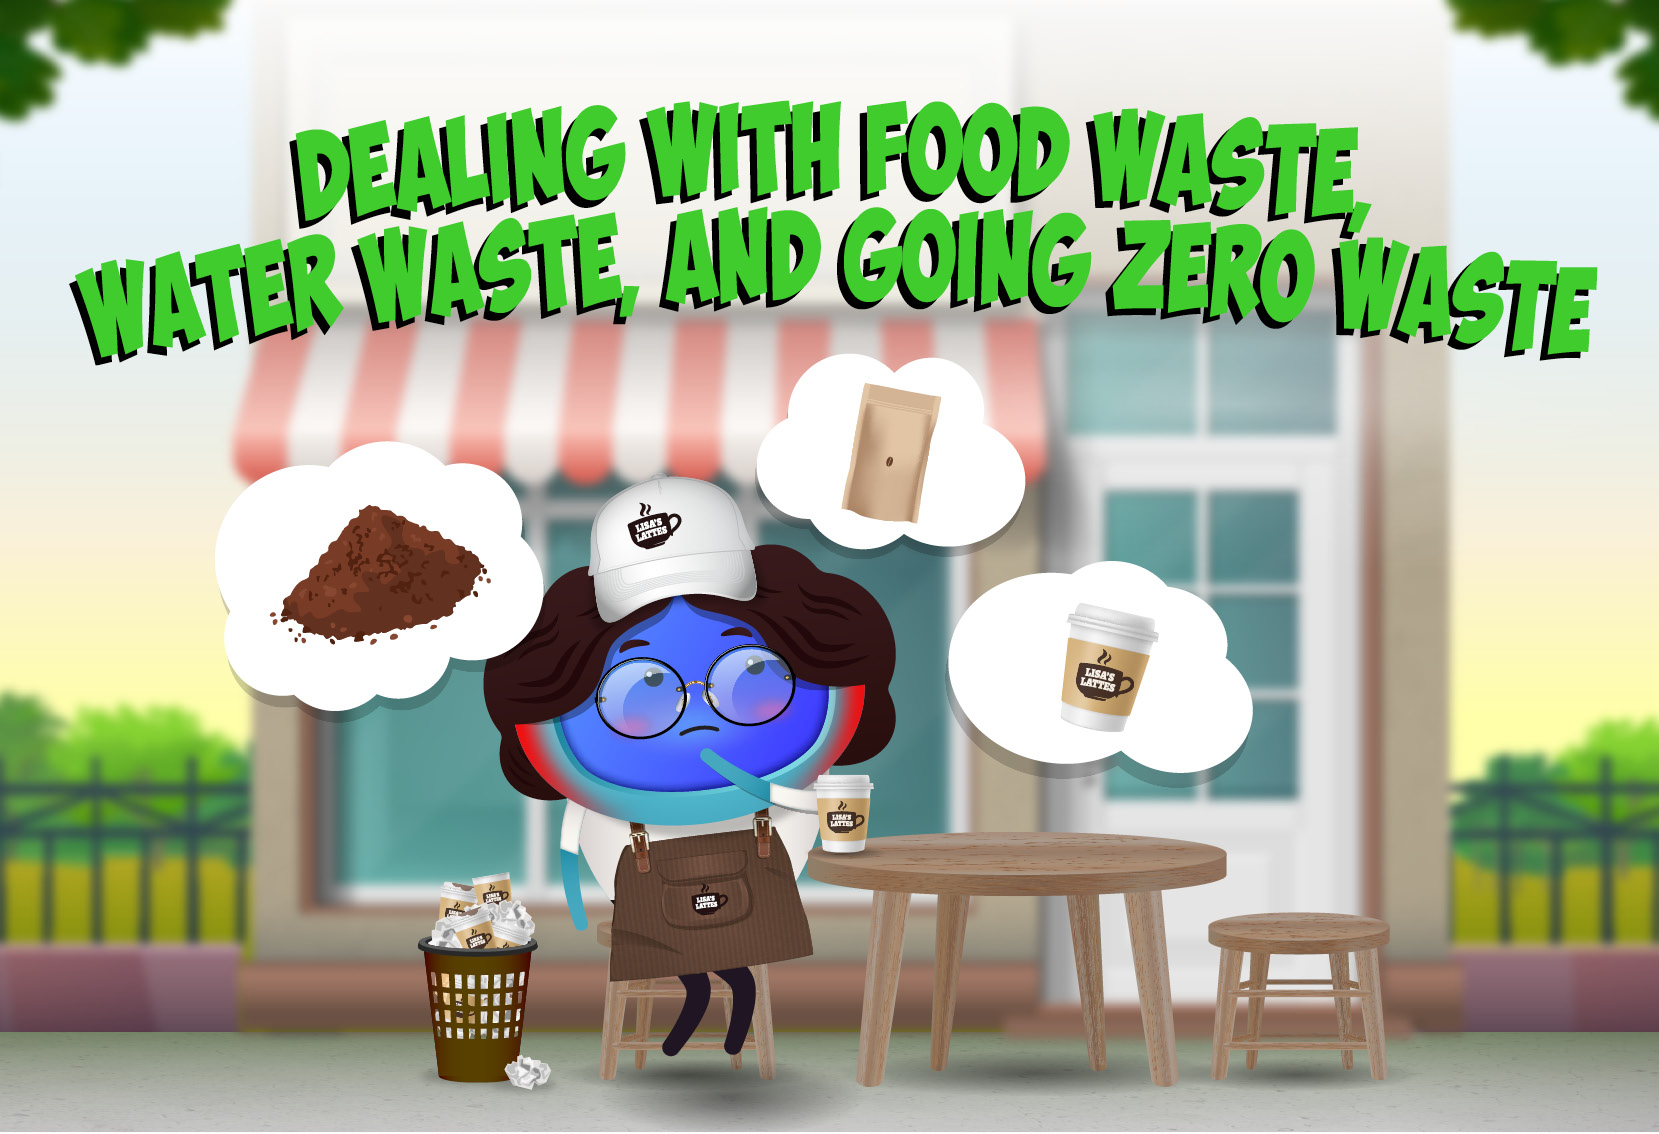 iAM 00340 - Dealing with Food Waste, Water Waste and Going Zero Waste - LMS Thumbnails